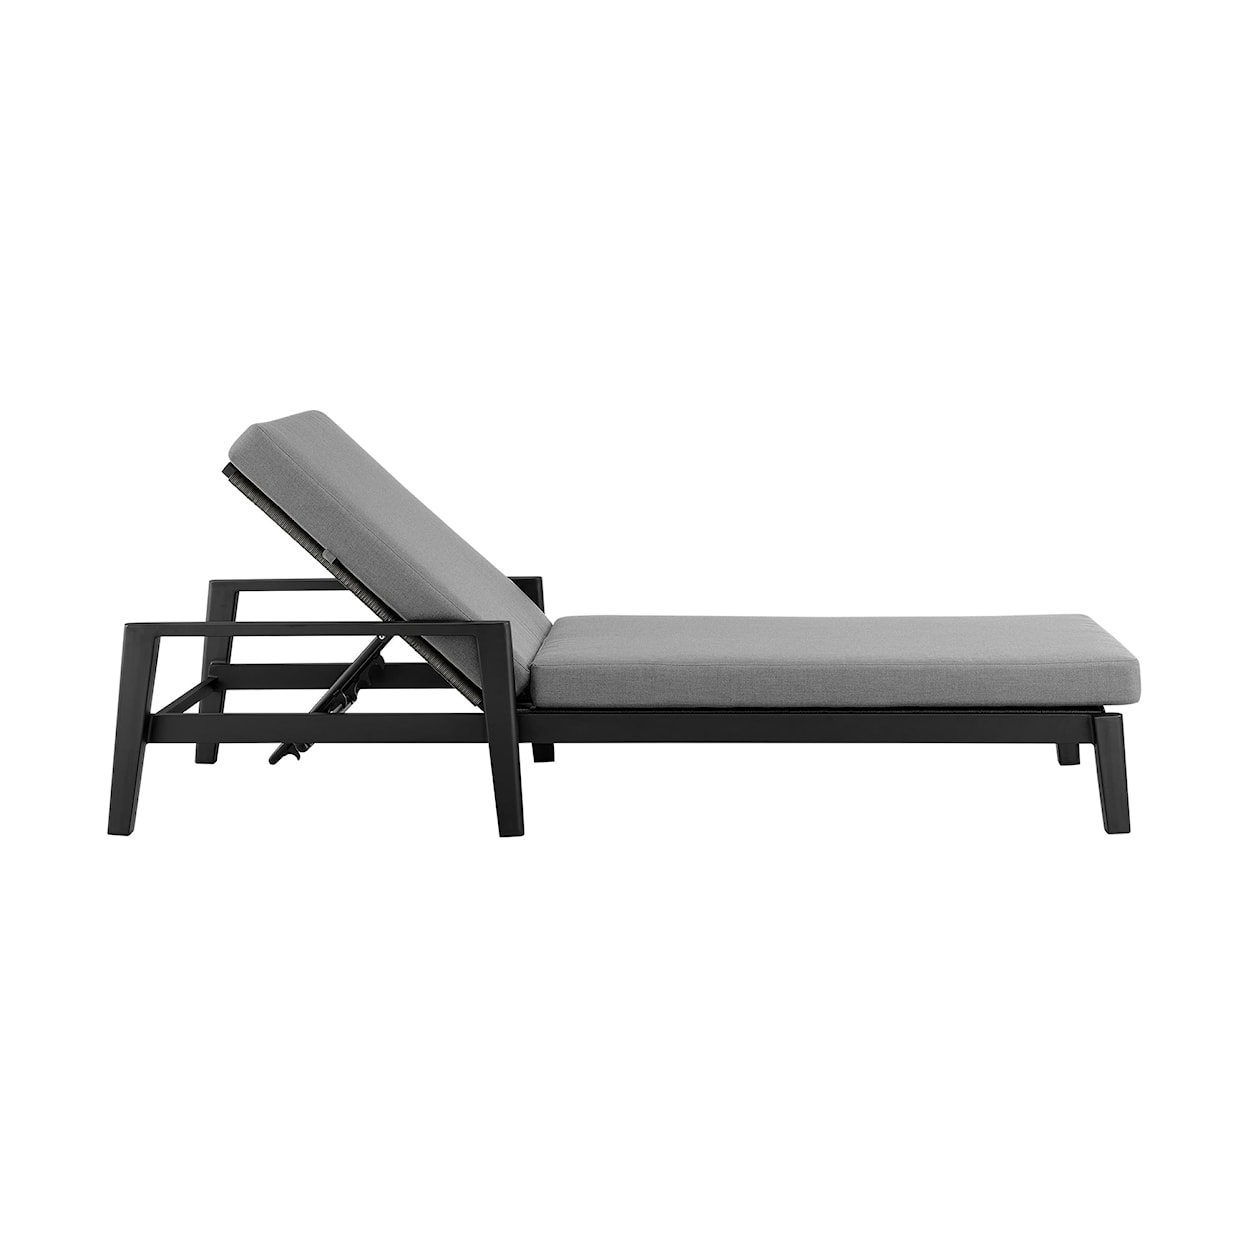 Armen Living Grand Outdoor Chaise Lounge